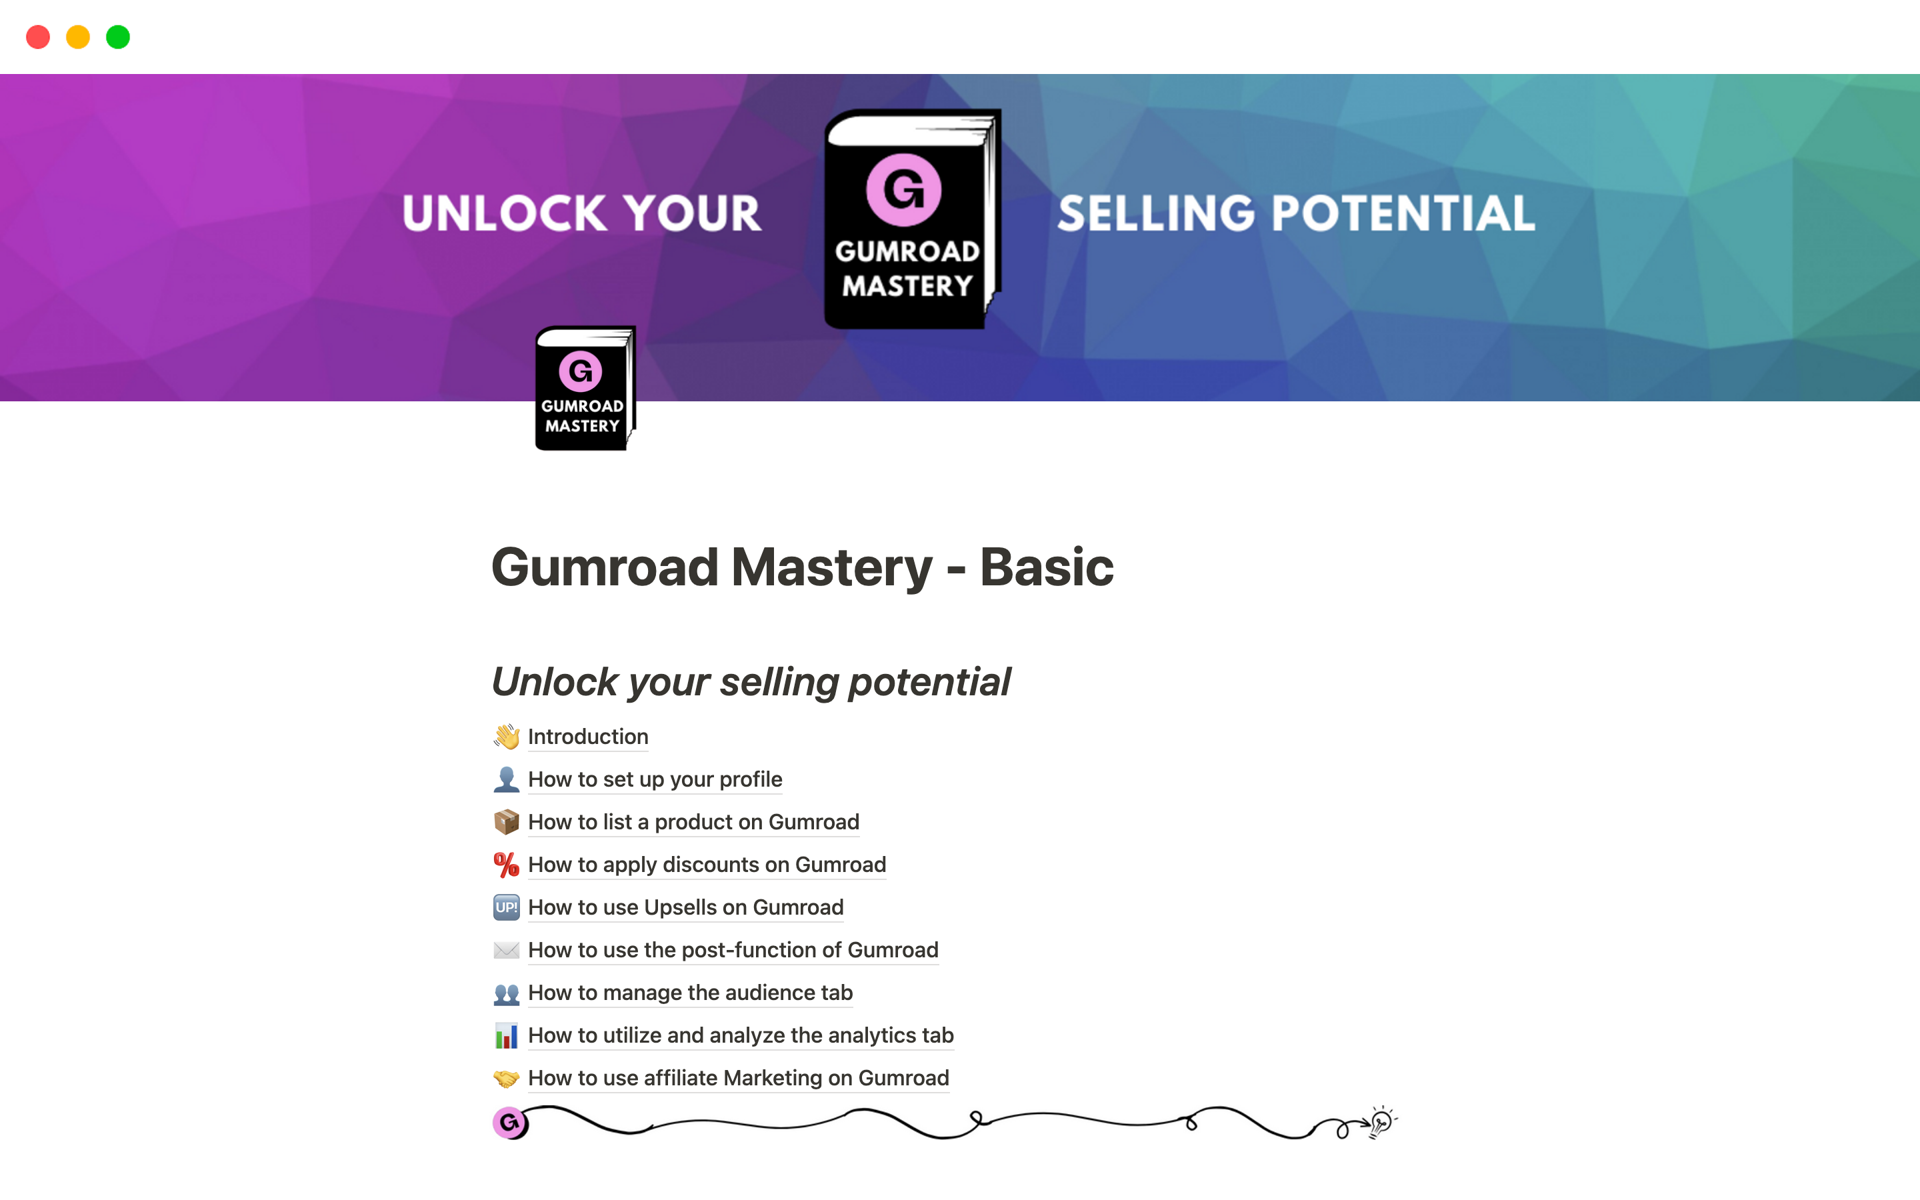 The ultimate guide to make you a master of Gumroad and skyrocket your sales!